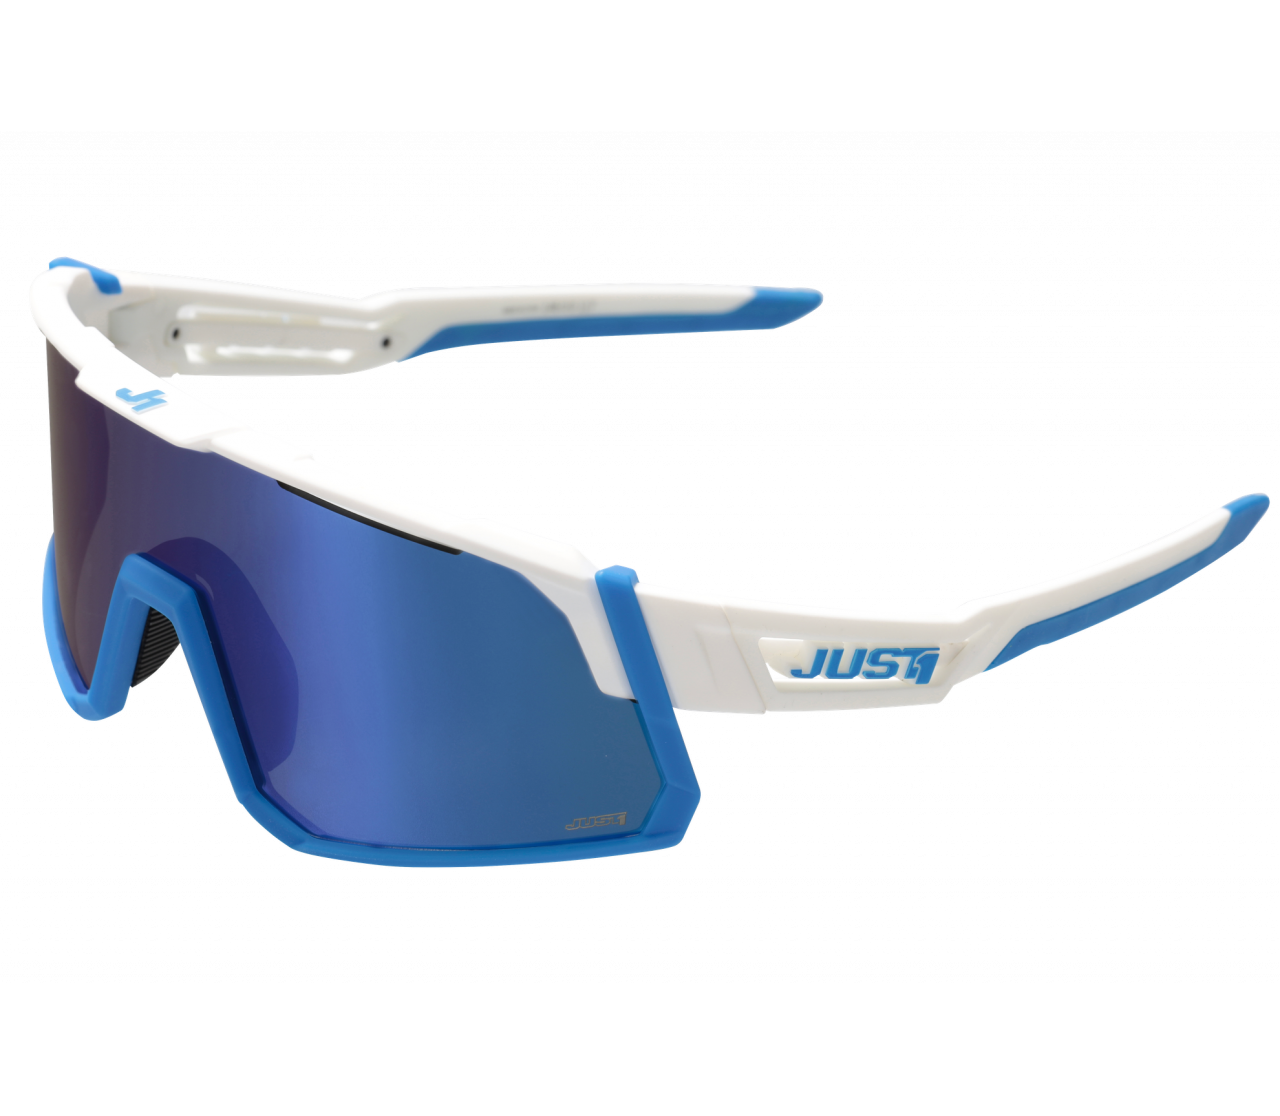 JUST1 SNIPER WHITE-BLUE with blue mirror lens